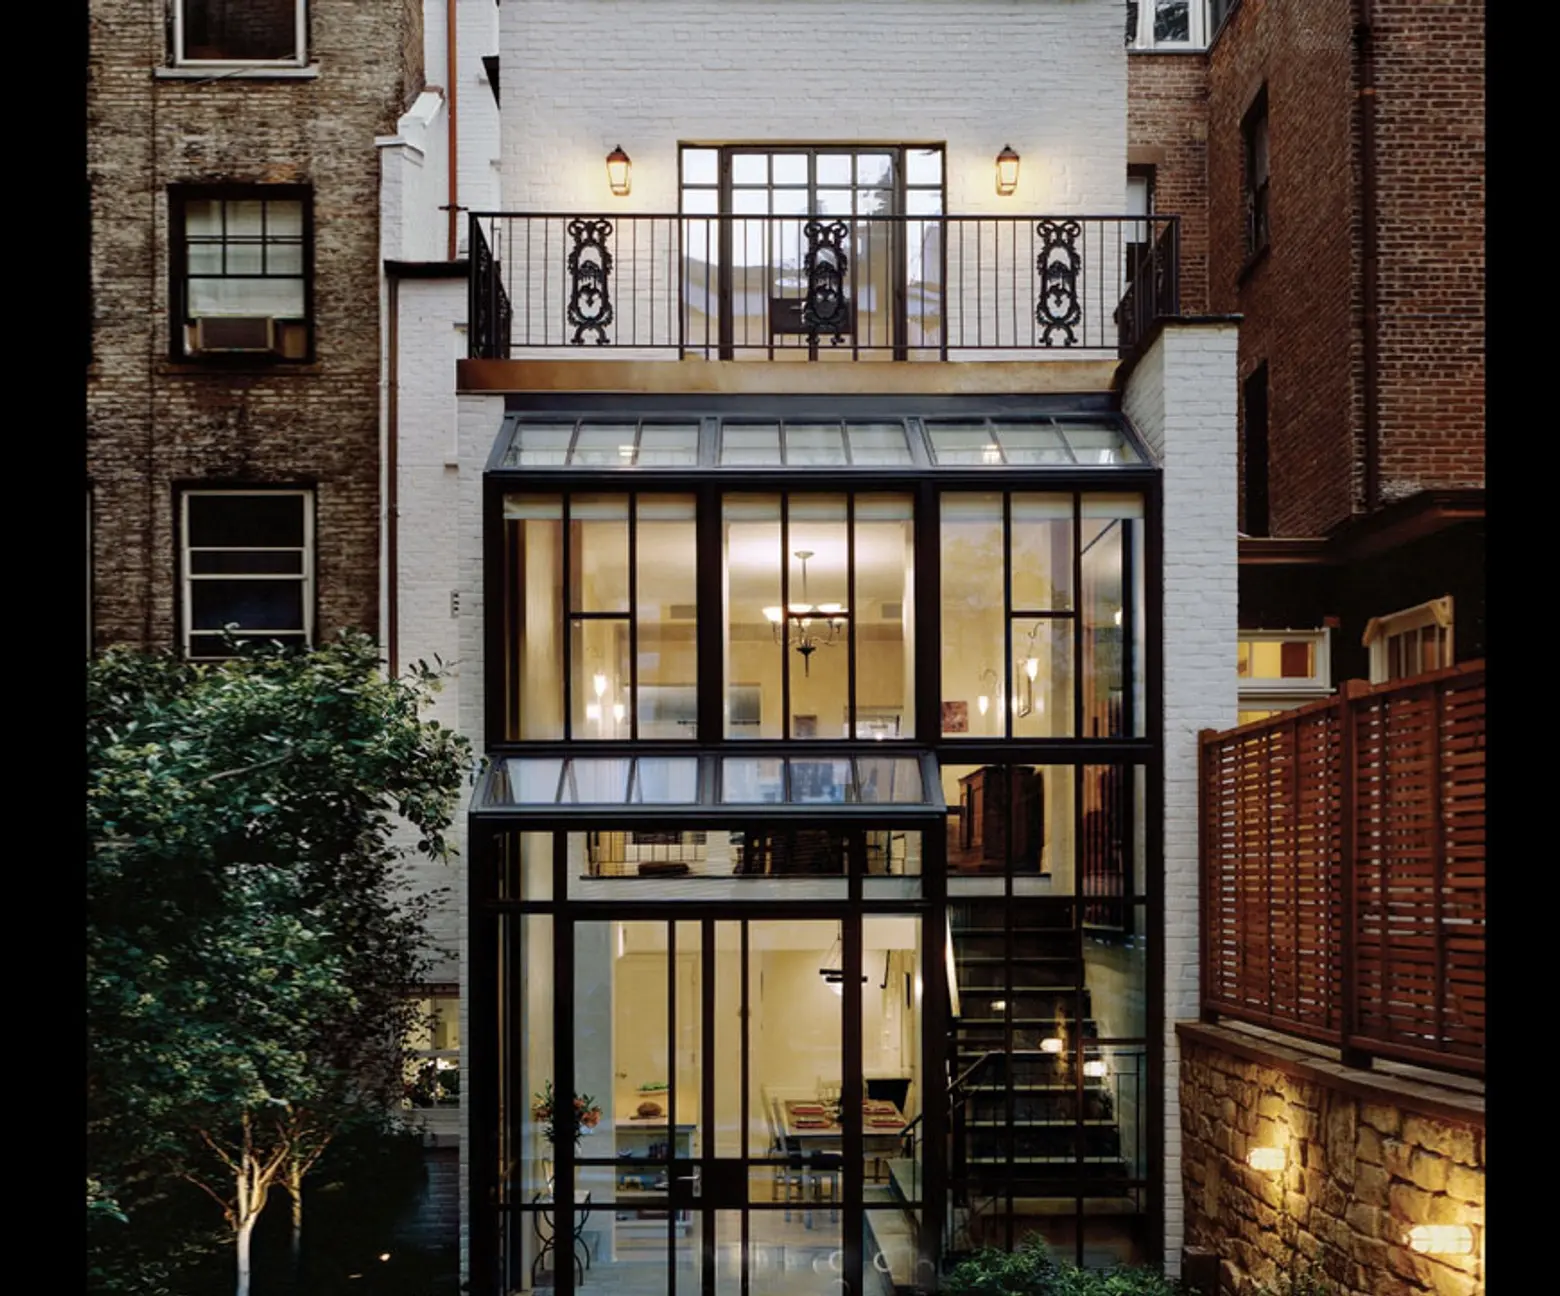 PBDW Architects Add a Dramatic Rear Conservatory to This Greenwich Village Townhouse